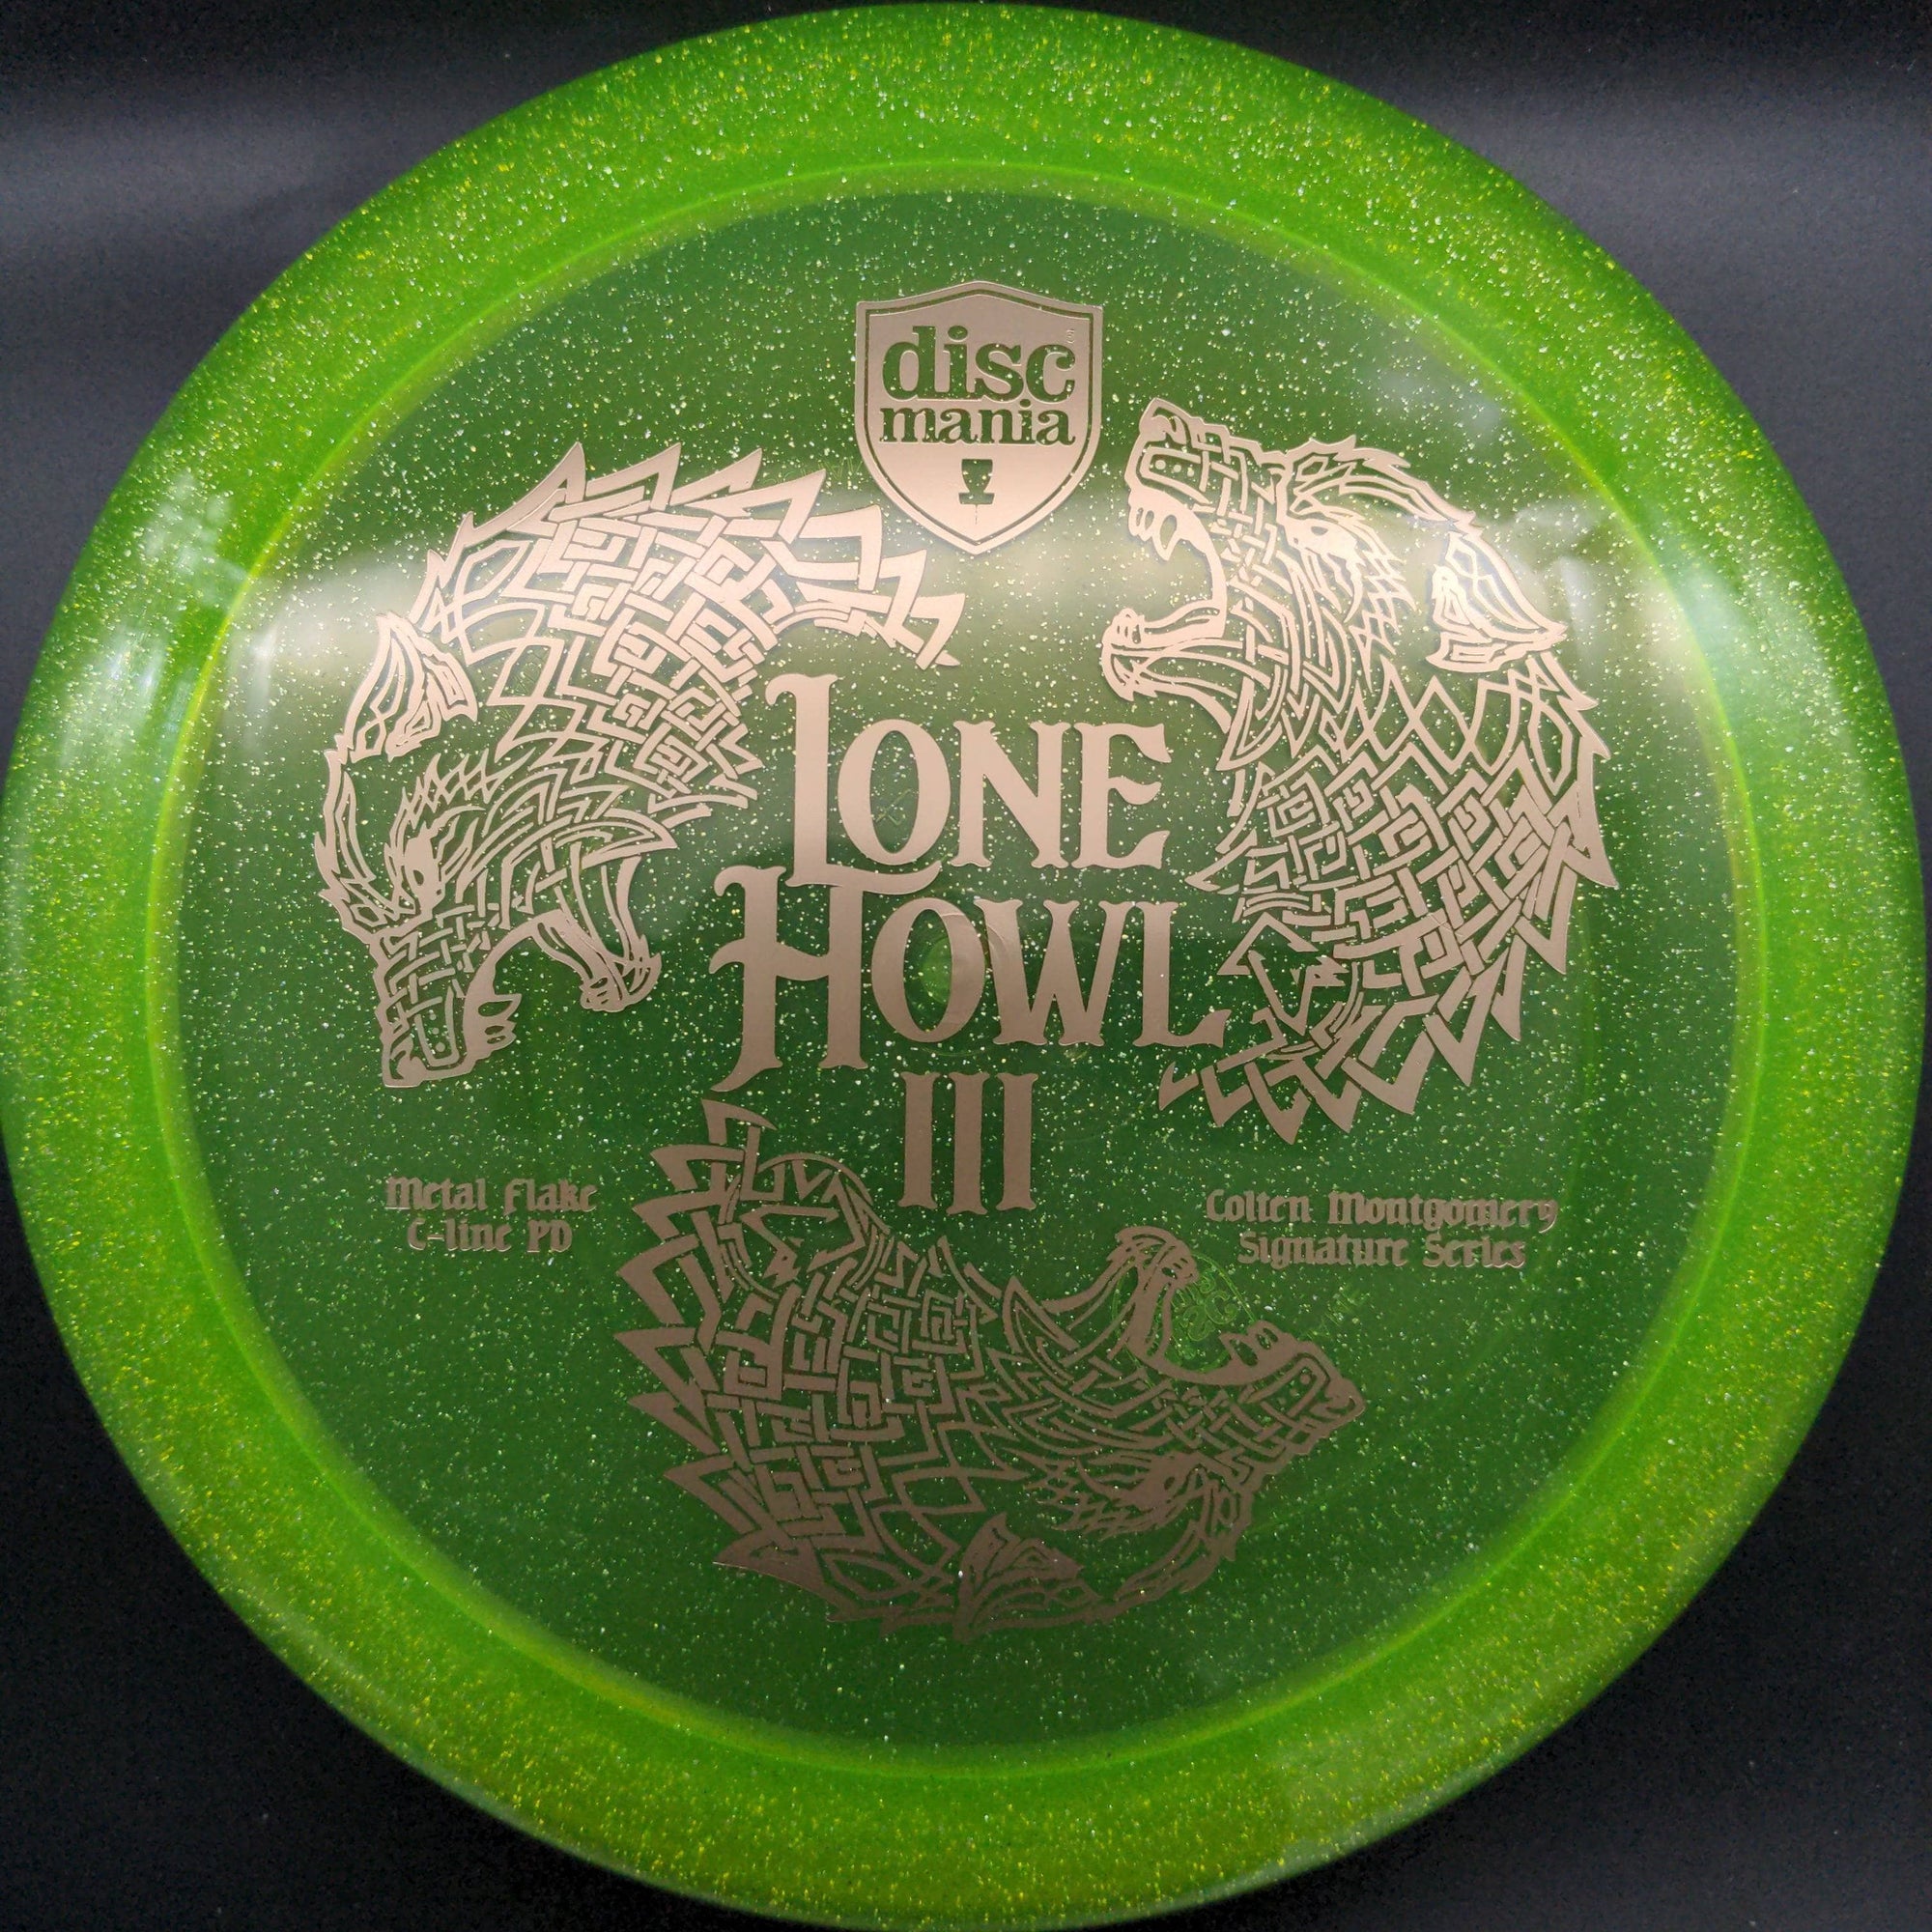 Discmania Distance Driver Green Tan Stamp 174g Tour Series Colten Montgomery Lone Howl 3, Metal Flake C-line PD